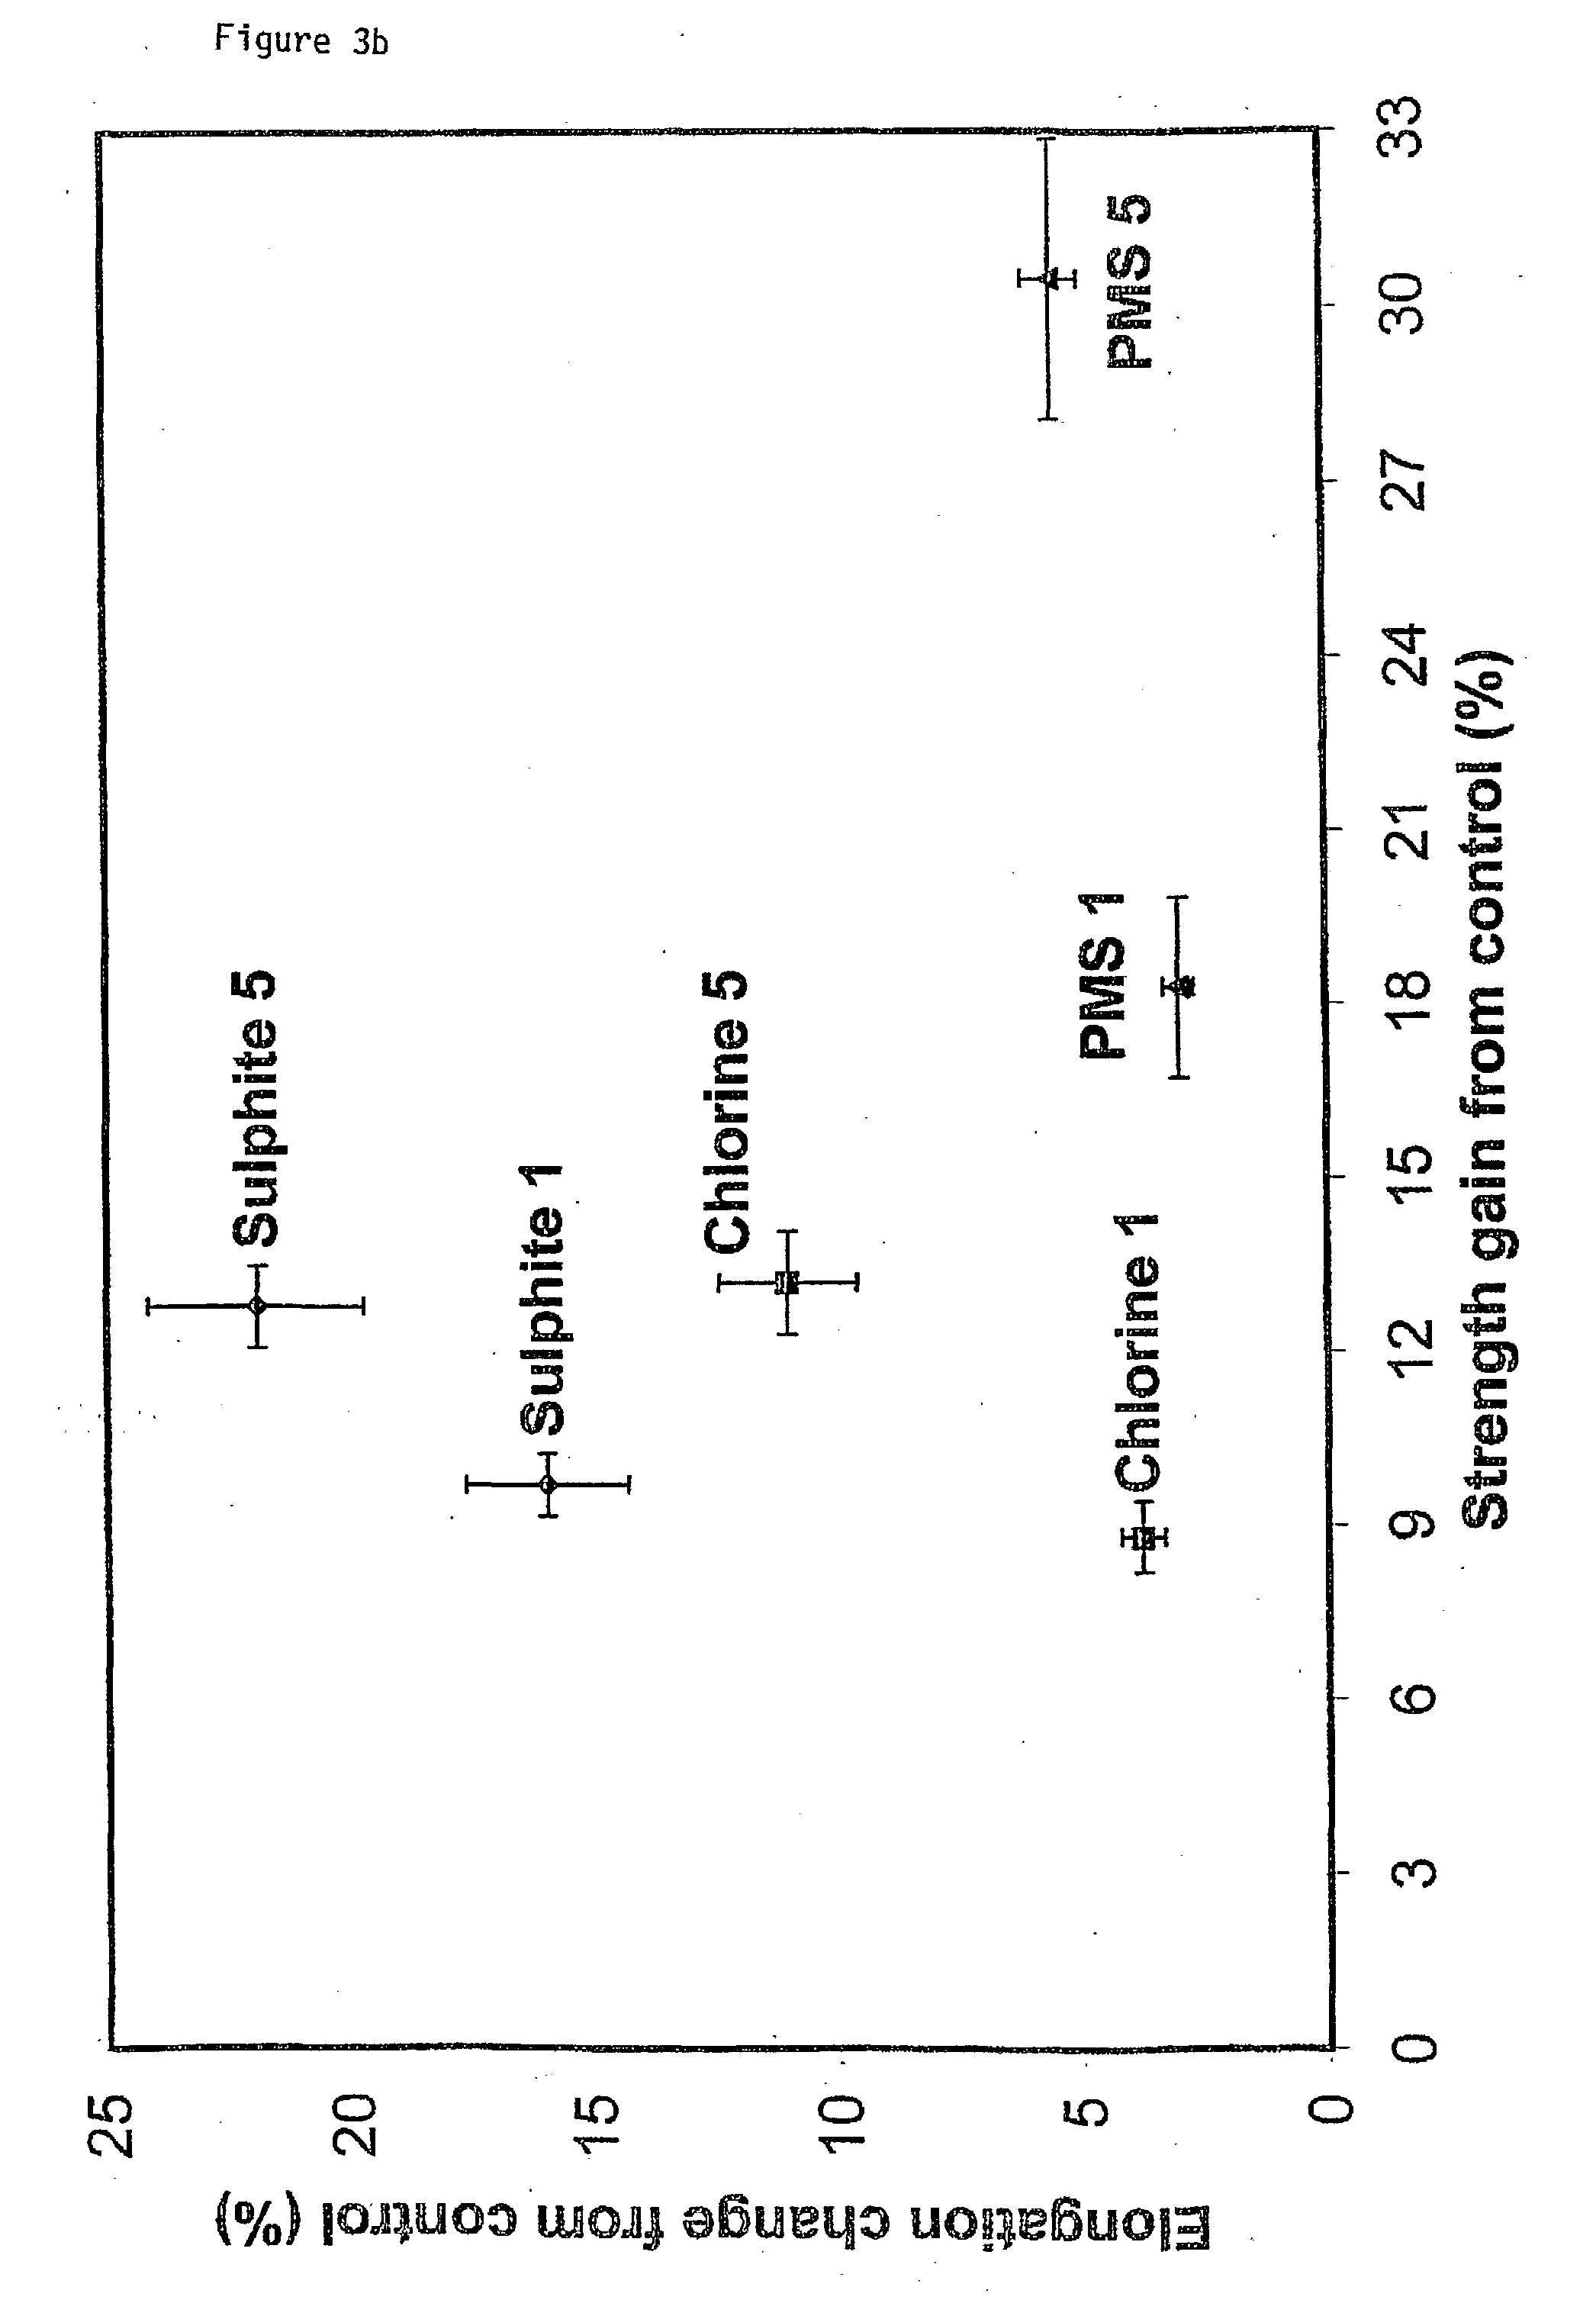 Method for enzymatic treatment of textiles such as wool